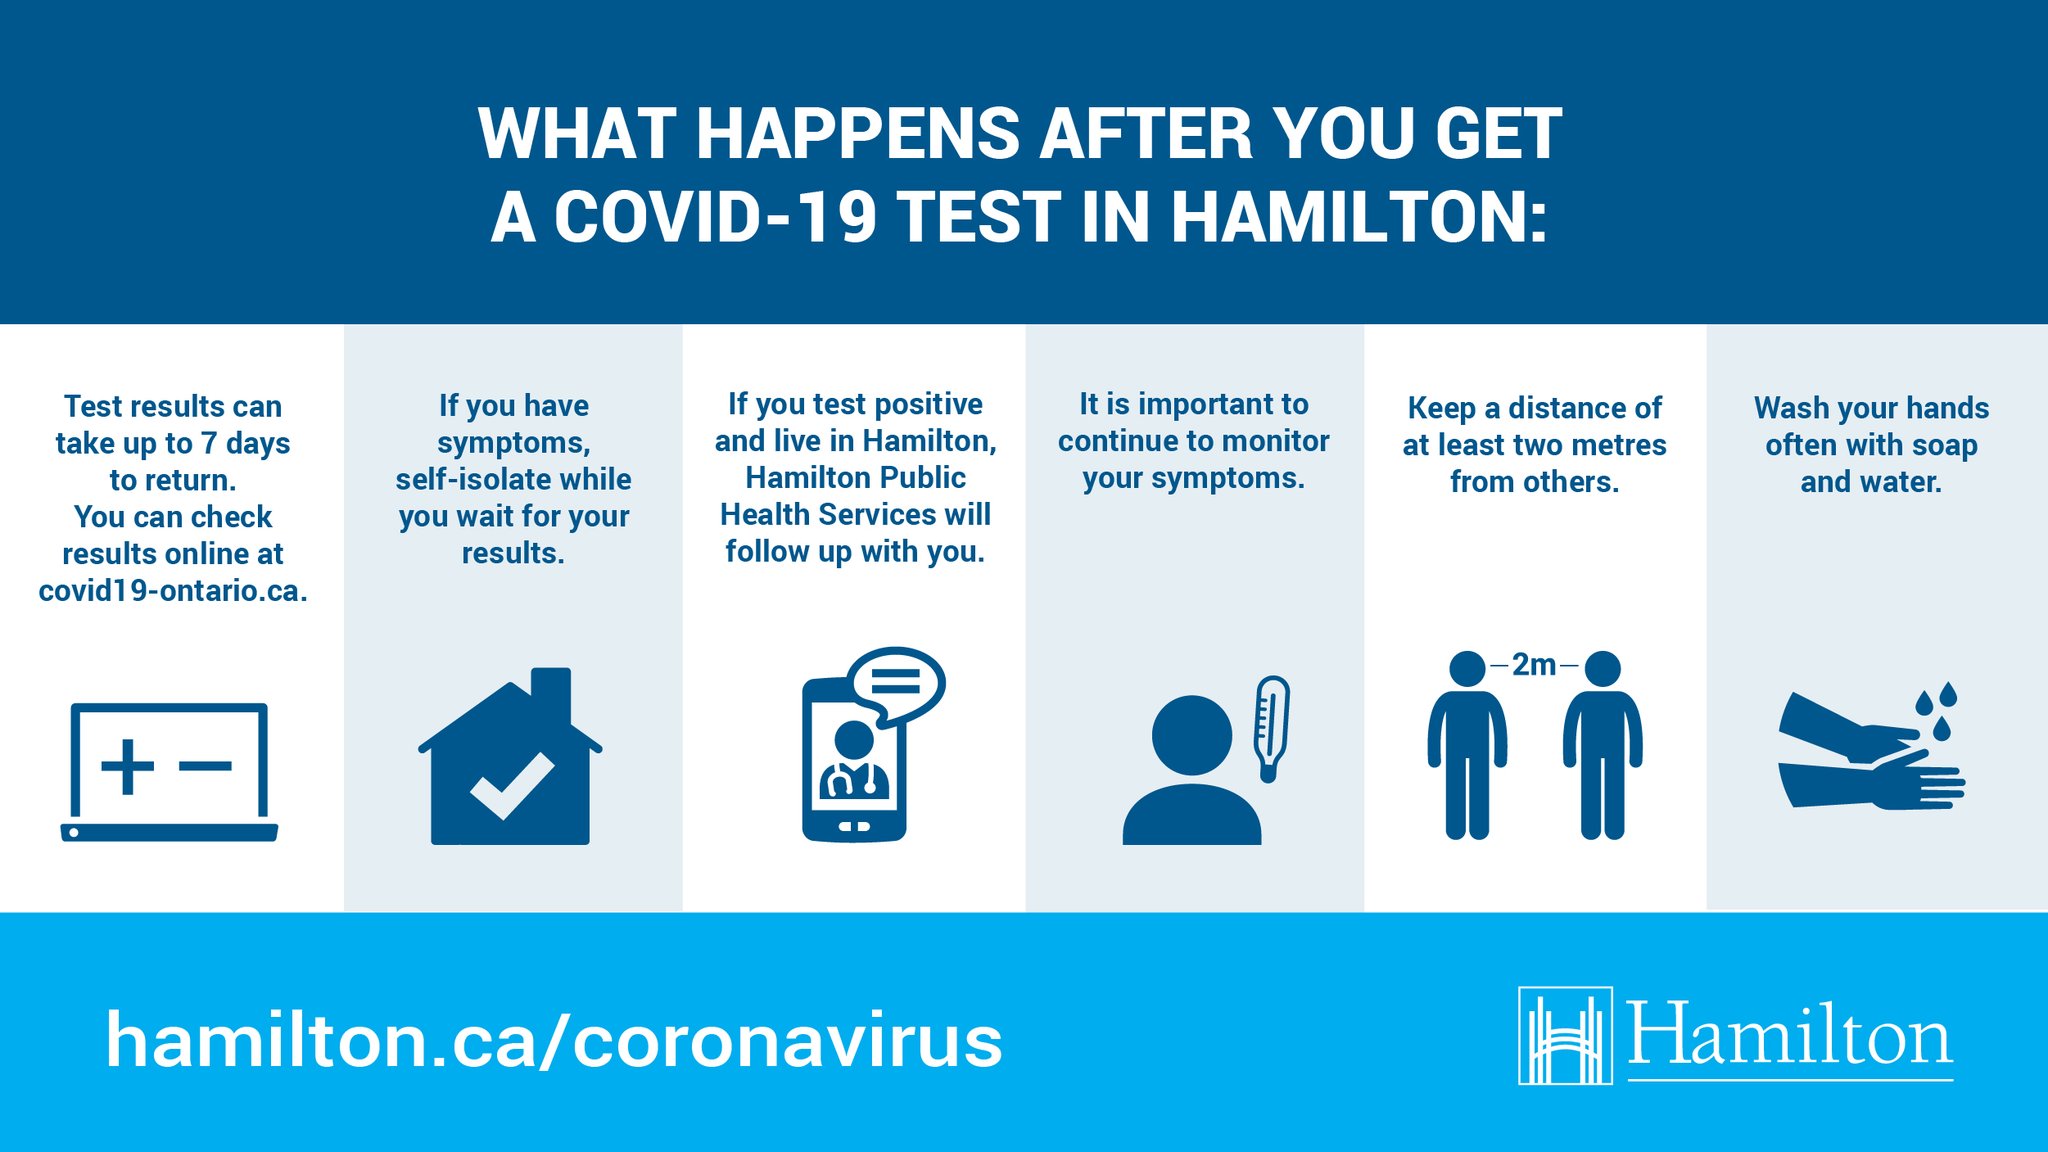 City Of Hamilton On Twitter You Can Find Your Covid 19 Test Results Online At Https T Co F1ctl7nri7 Continue To Check The Portal Until Your Test Results Are Updated Or Contact Your Family Doctor It